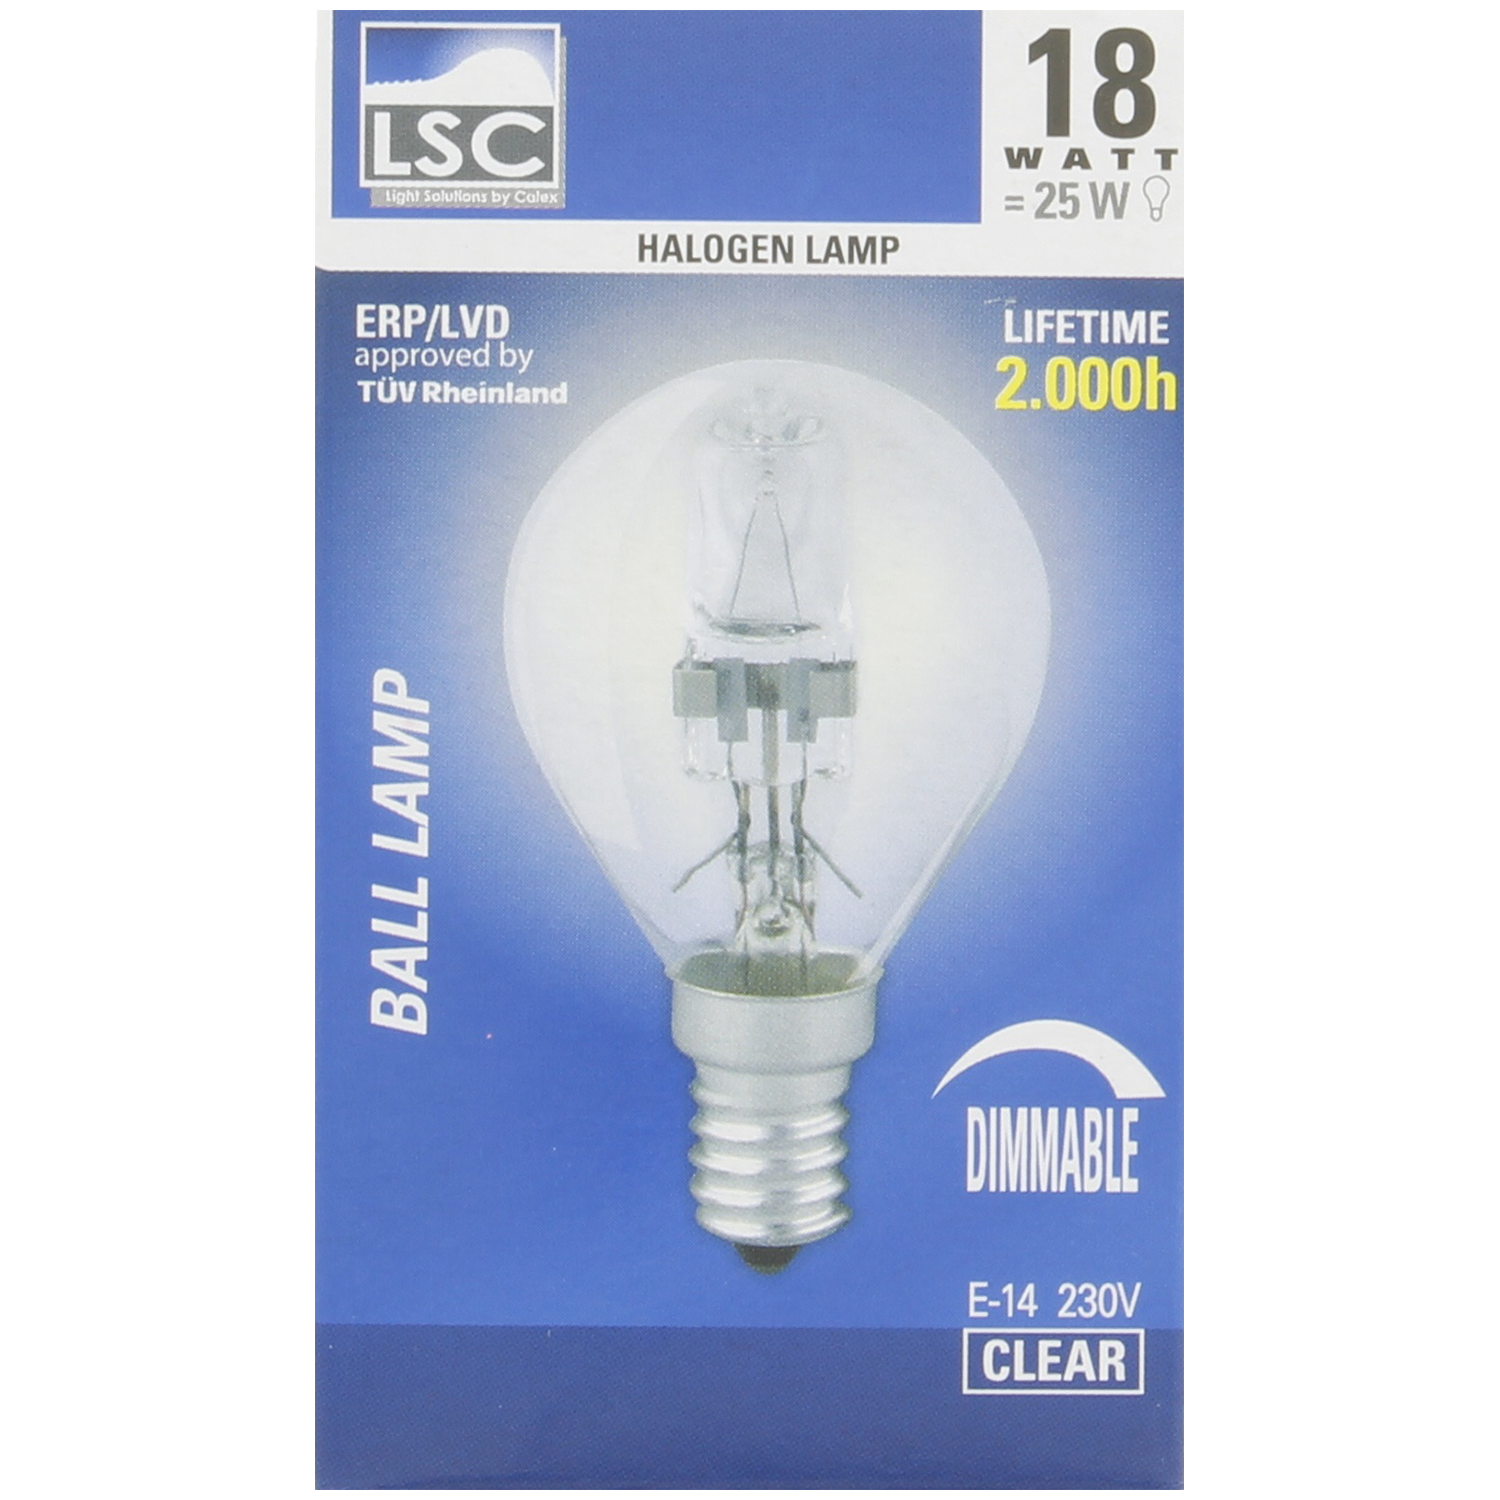 Commotie Monica dividend LSC Halogen Lamp Light Solutions By Calex at Action